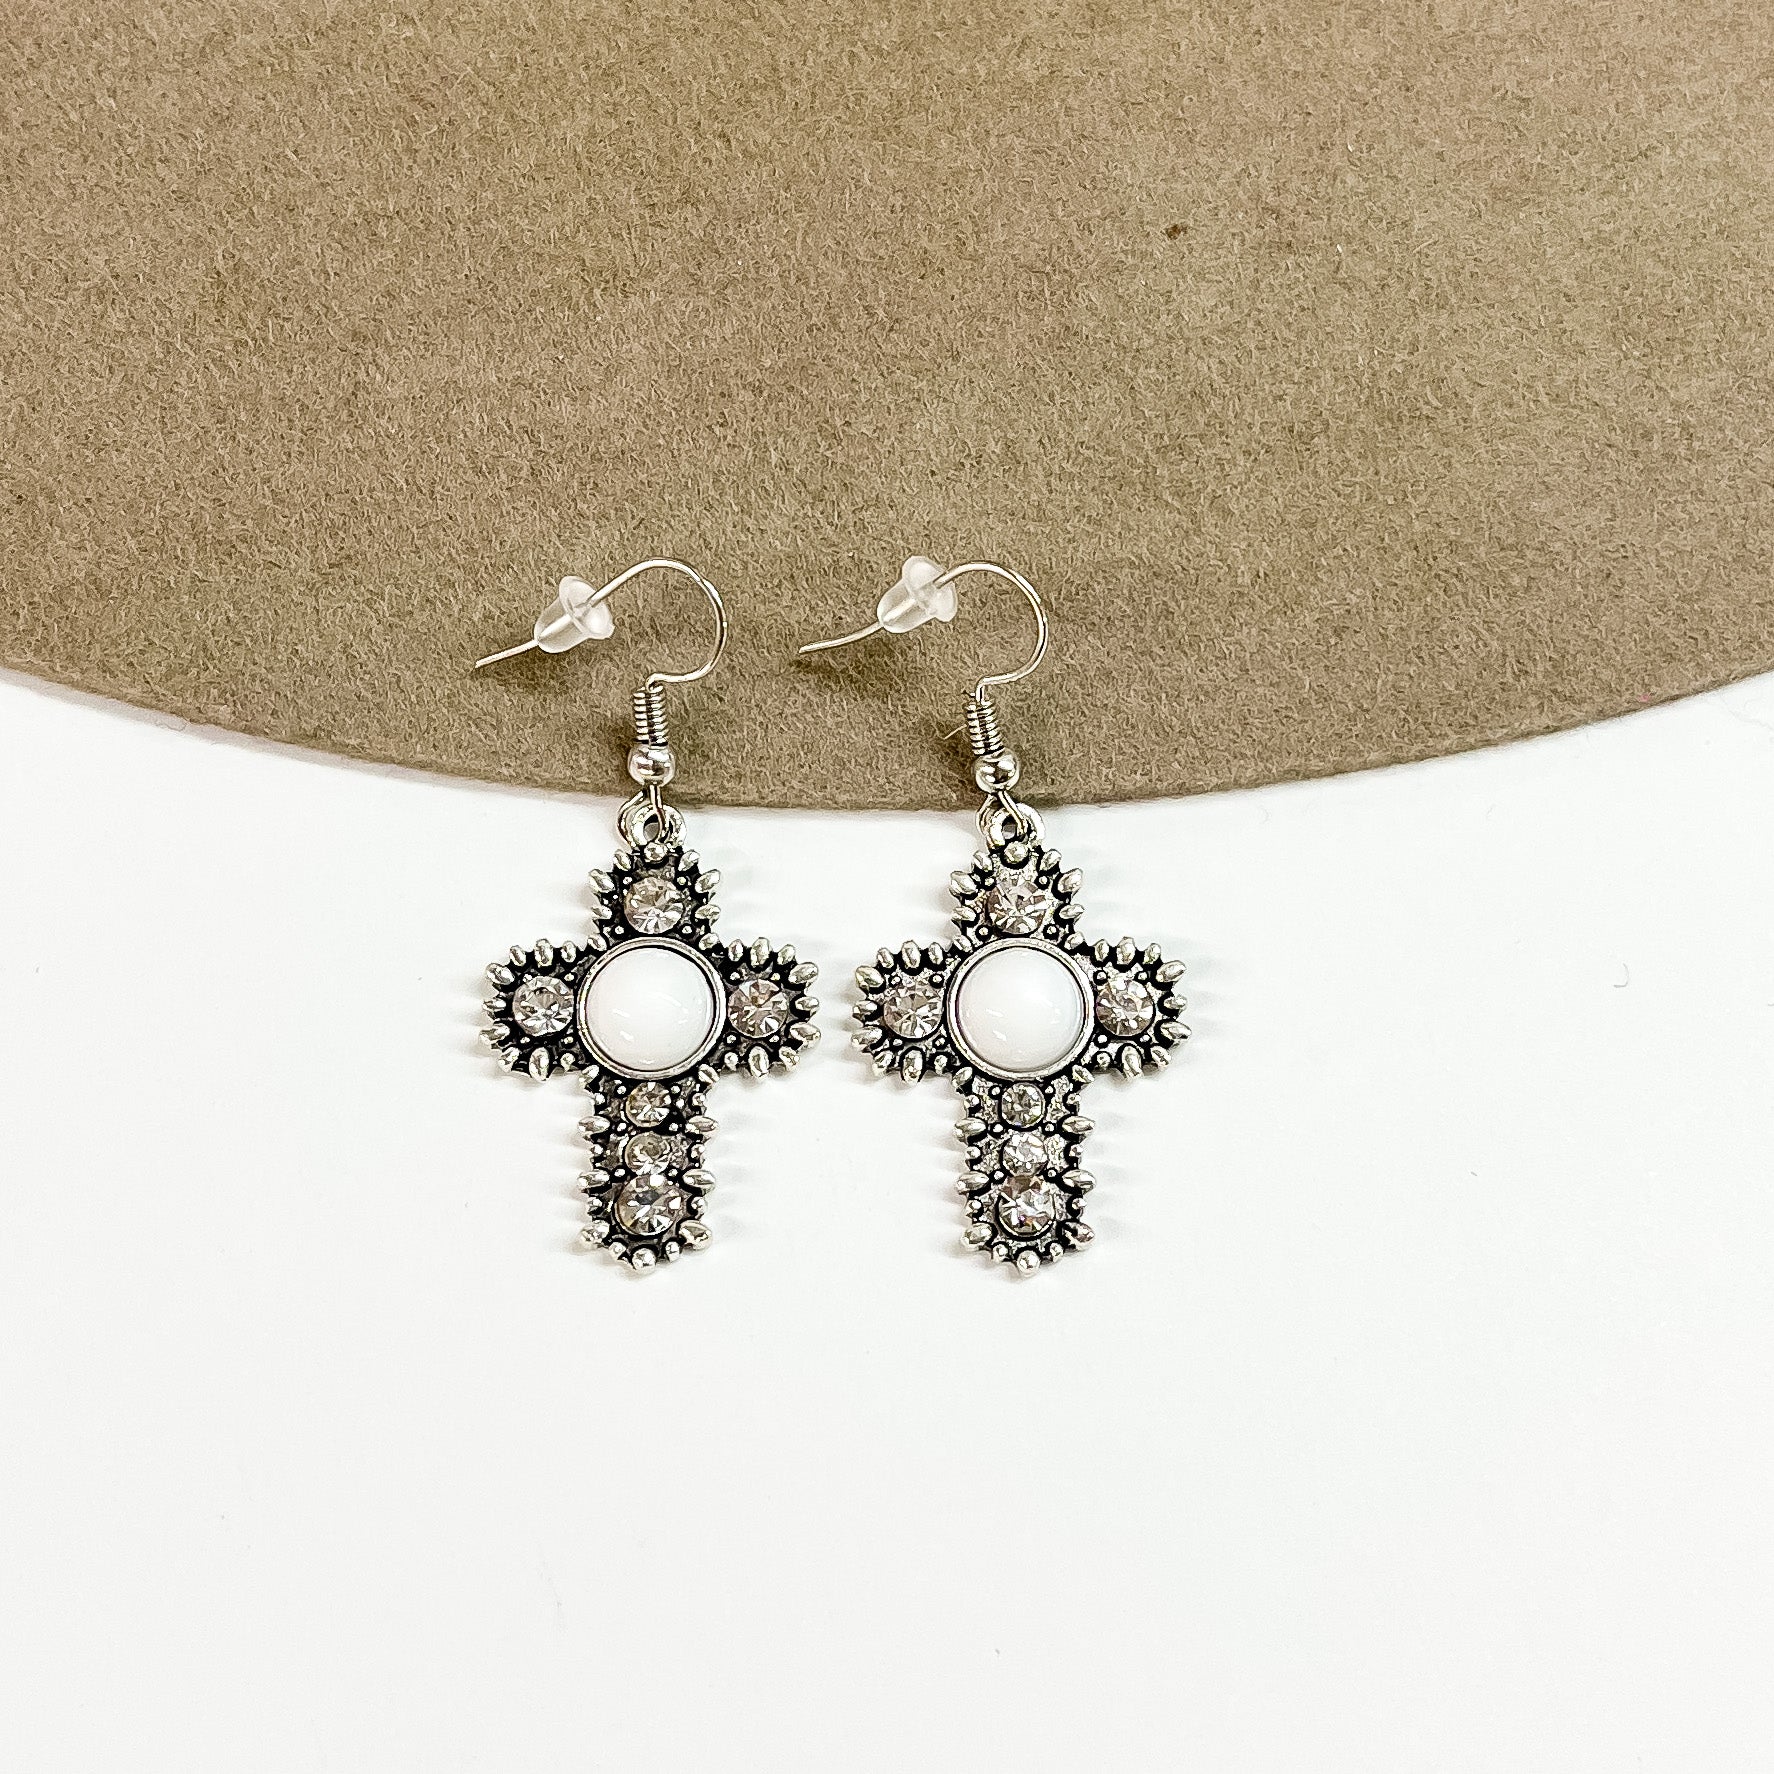 This is a pair of silver detailed cross earrings with small clear crystals and a white circle stone in the center. These earrings are laying on a brown felt hat brim and on a white background.